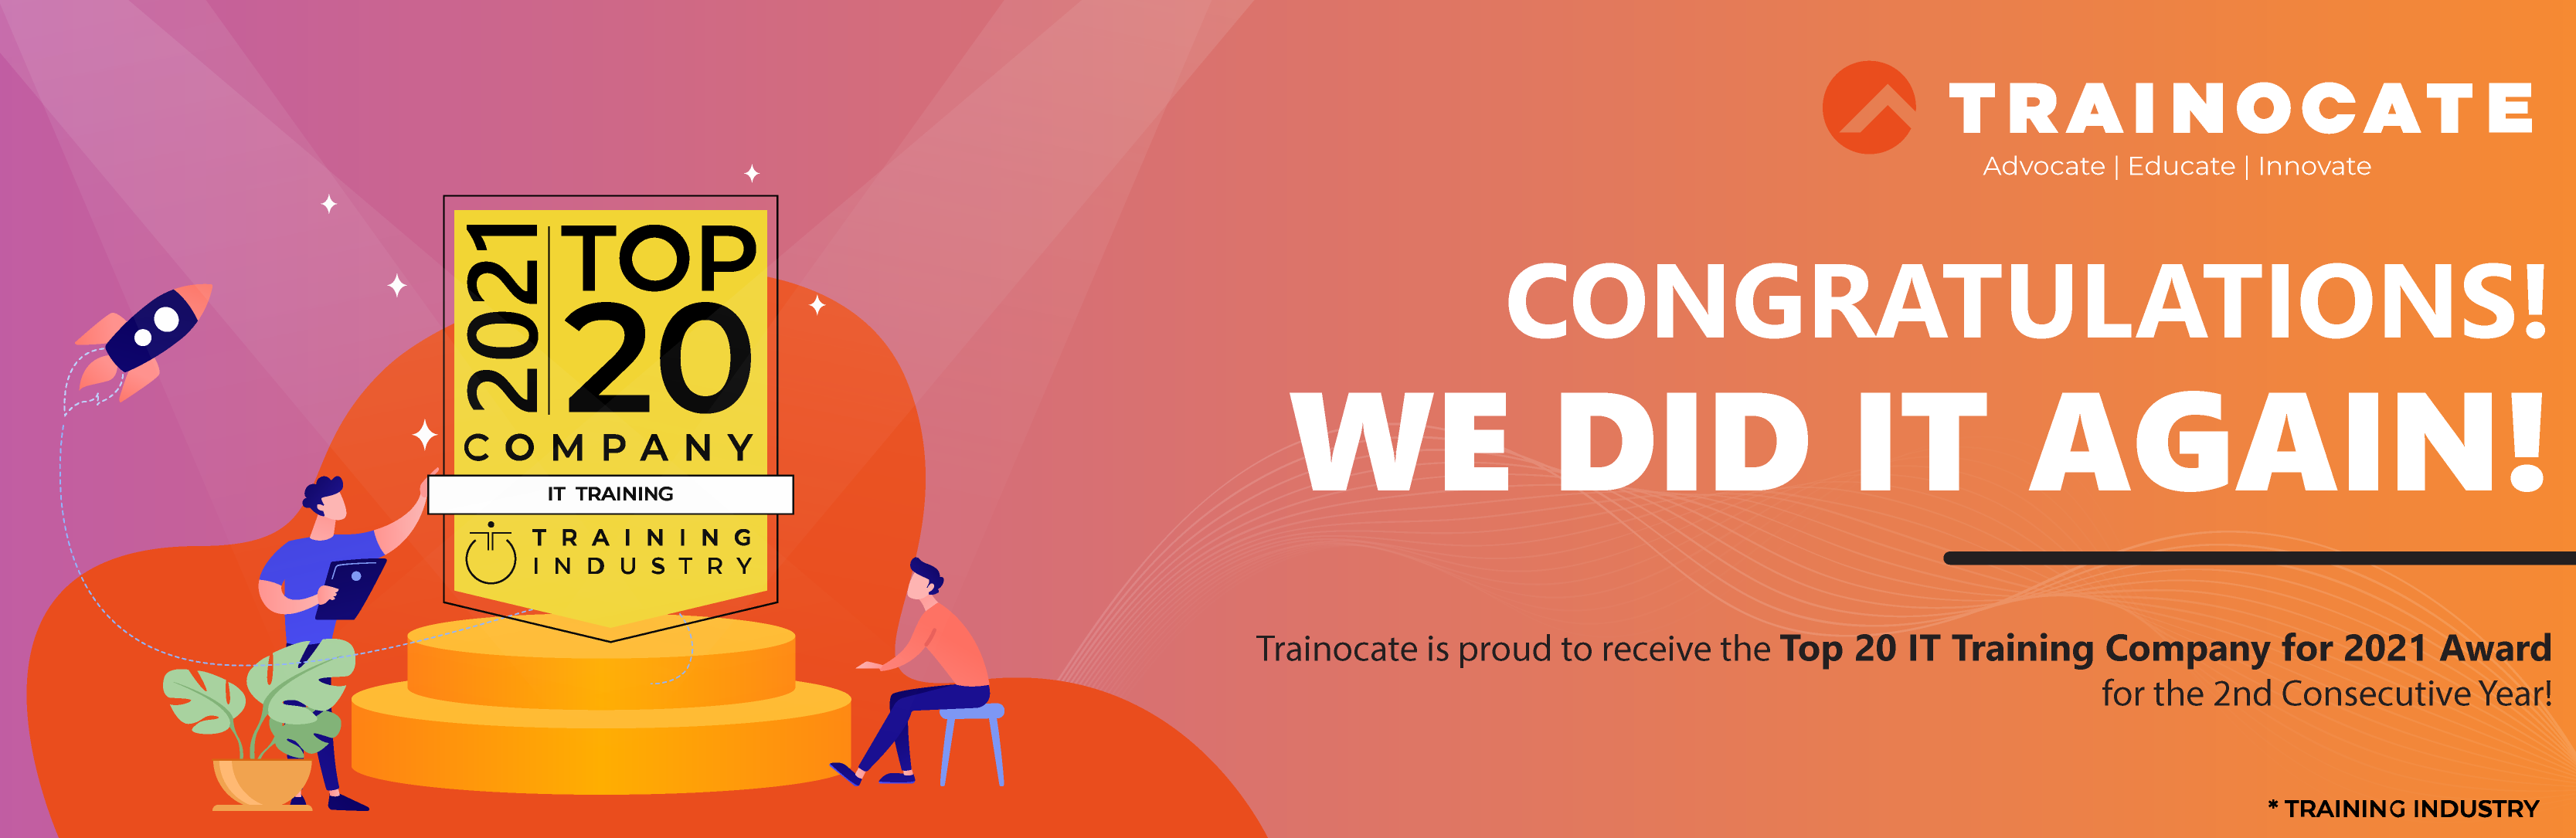 trainocate-wins-top-20-training-company-2021-banner.png